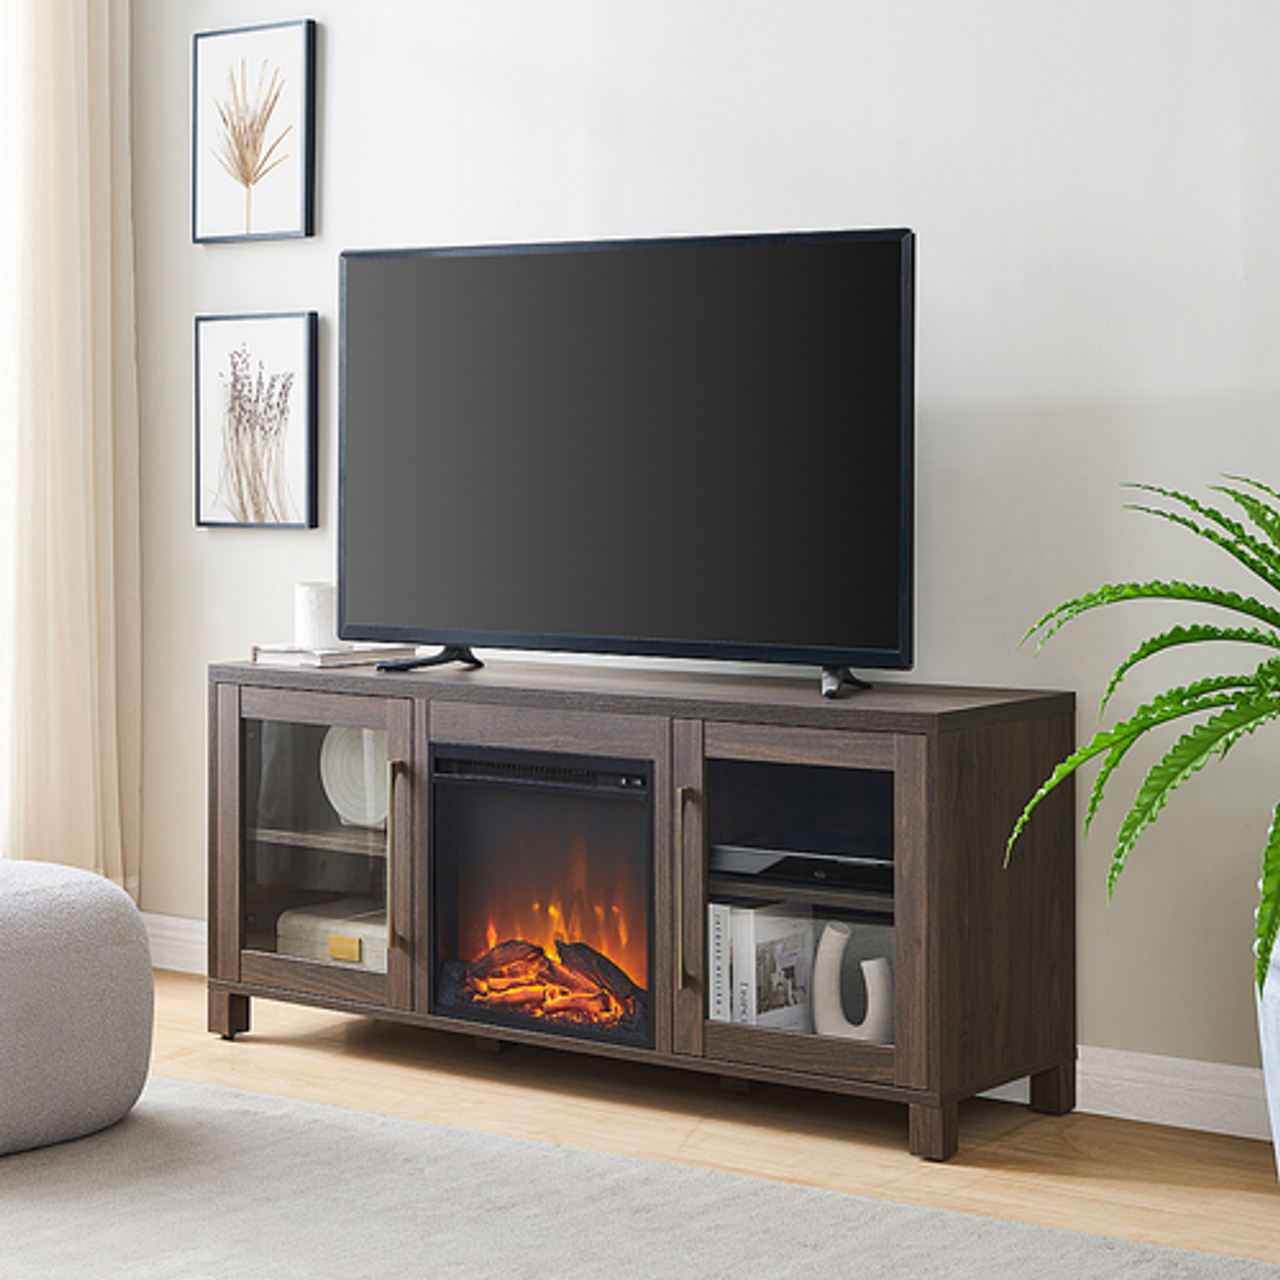 Camden&Wells - Quincy Crystal Fireplace TV Stand for TVs up to 65" - Alder Brown